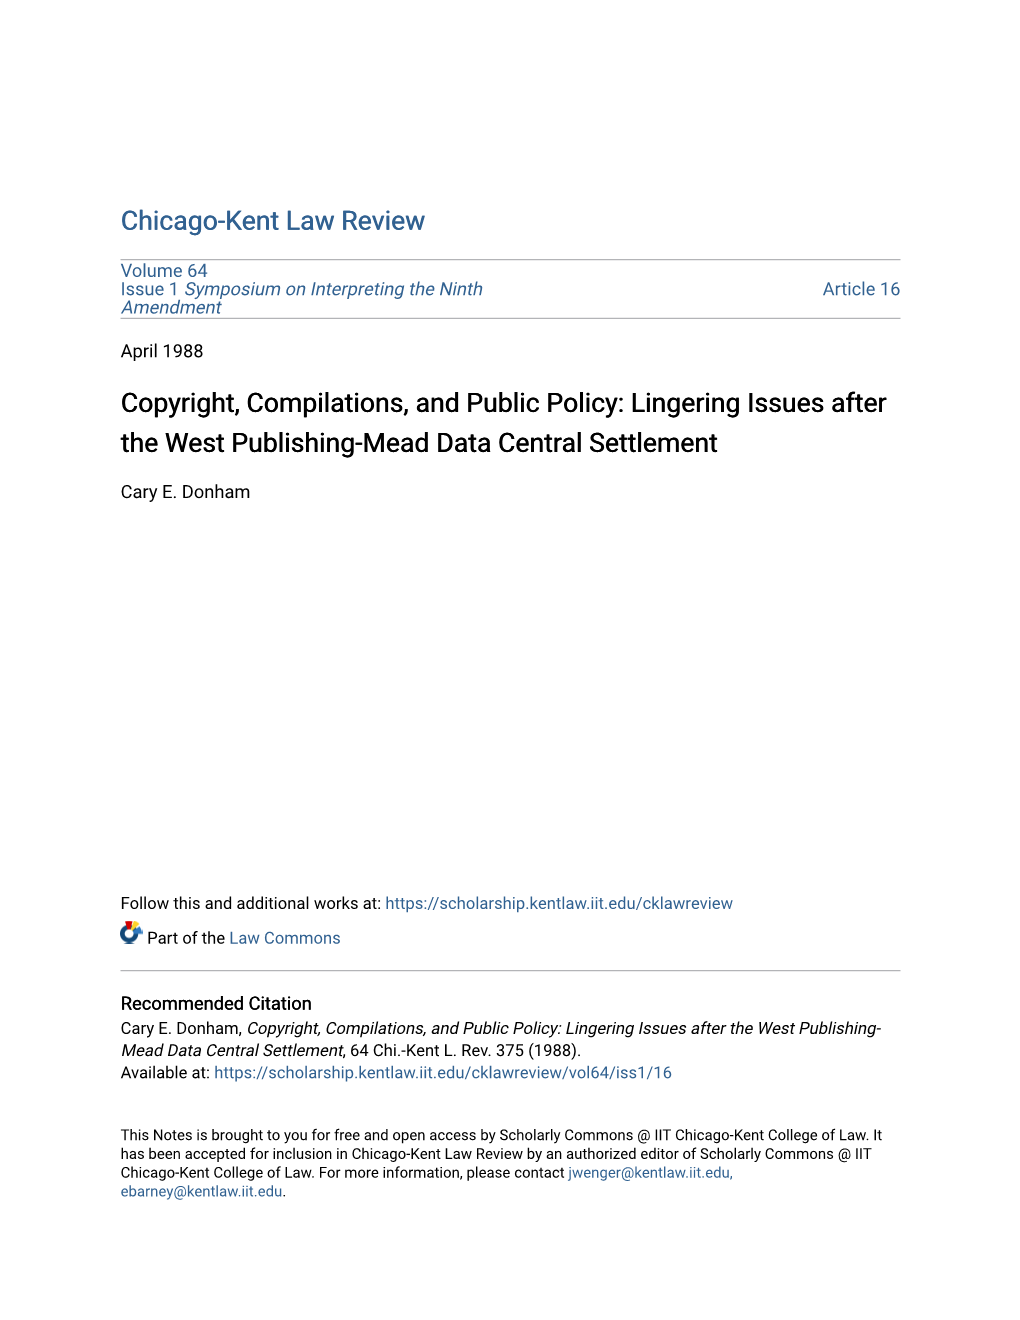 Copyright, Compilations, and Public Policy: Lingering Issues After the West Publishing-Mead Data Central Settlement